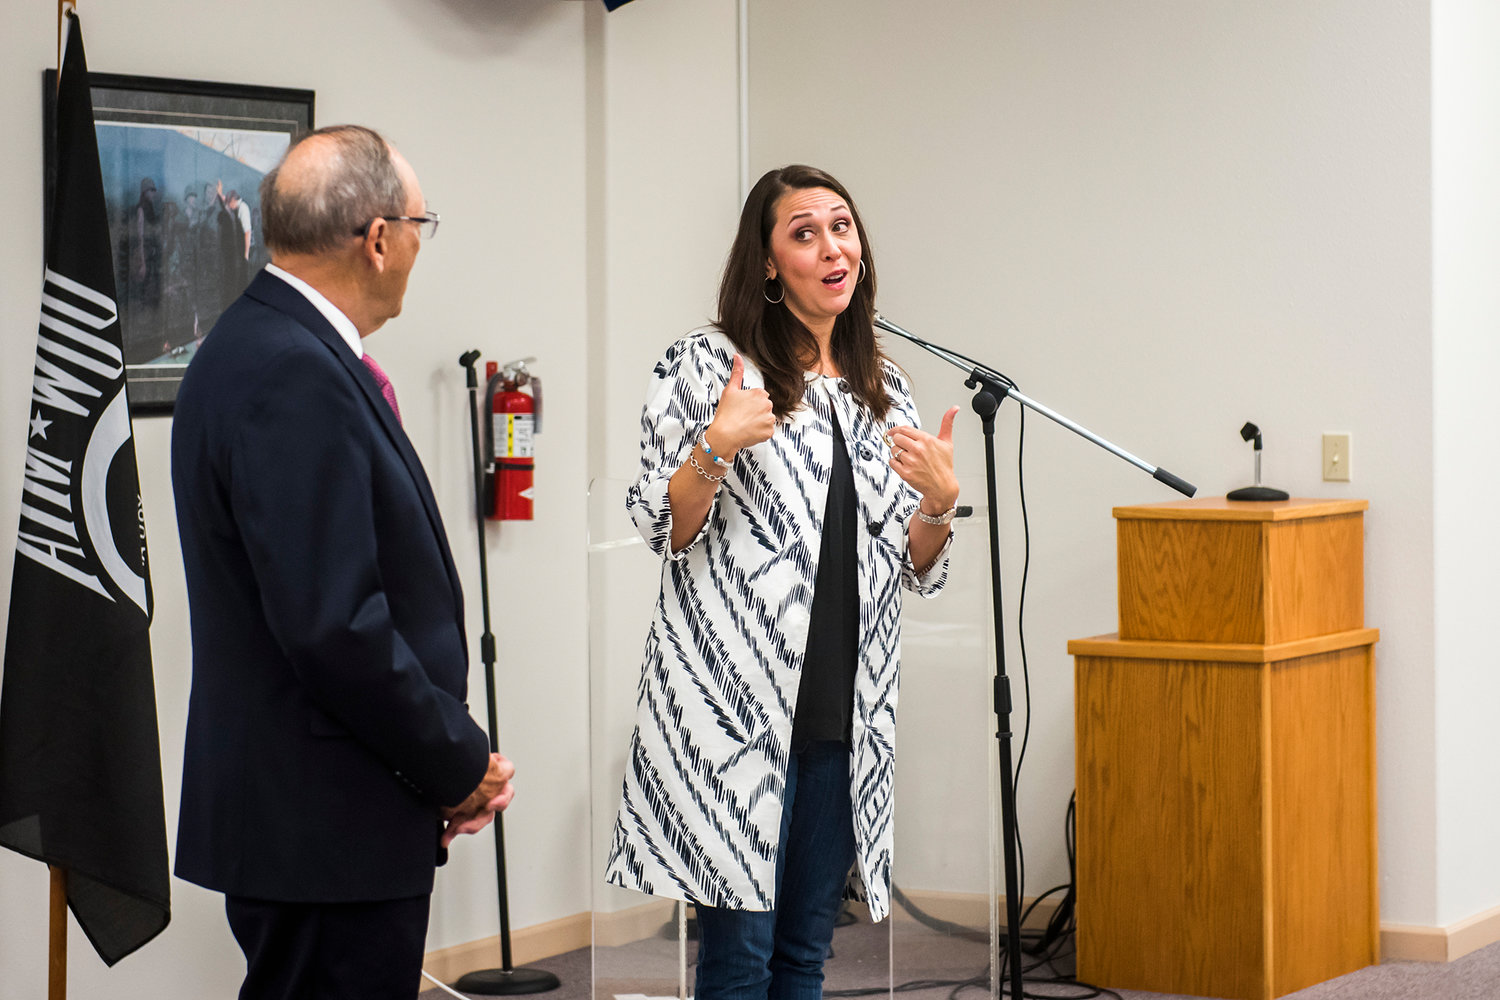 Representative Phil Roe, left, of Tennessee, and Jaime Herrera Beutler, right, talk to veterans during a public meeting at the Chehalis Veterans Memorial Museum in October 2019. 